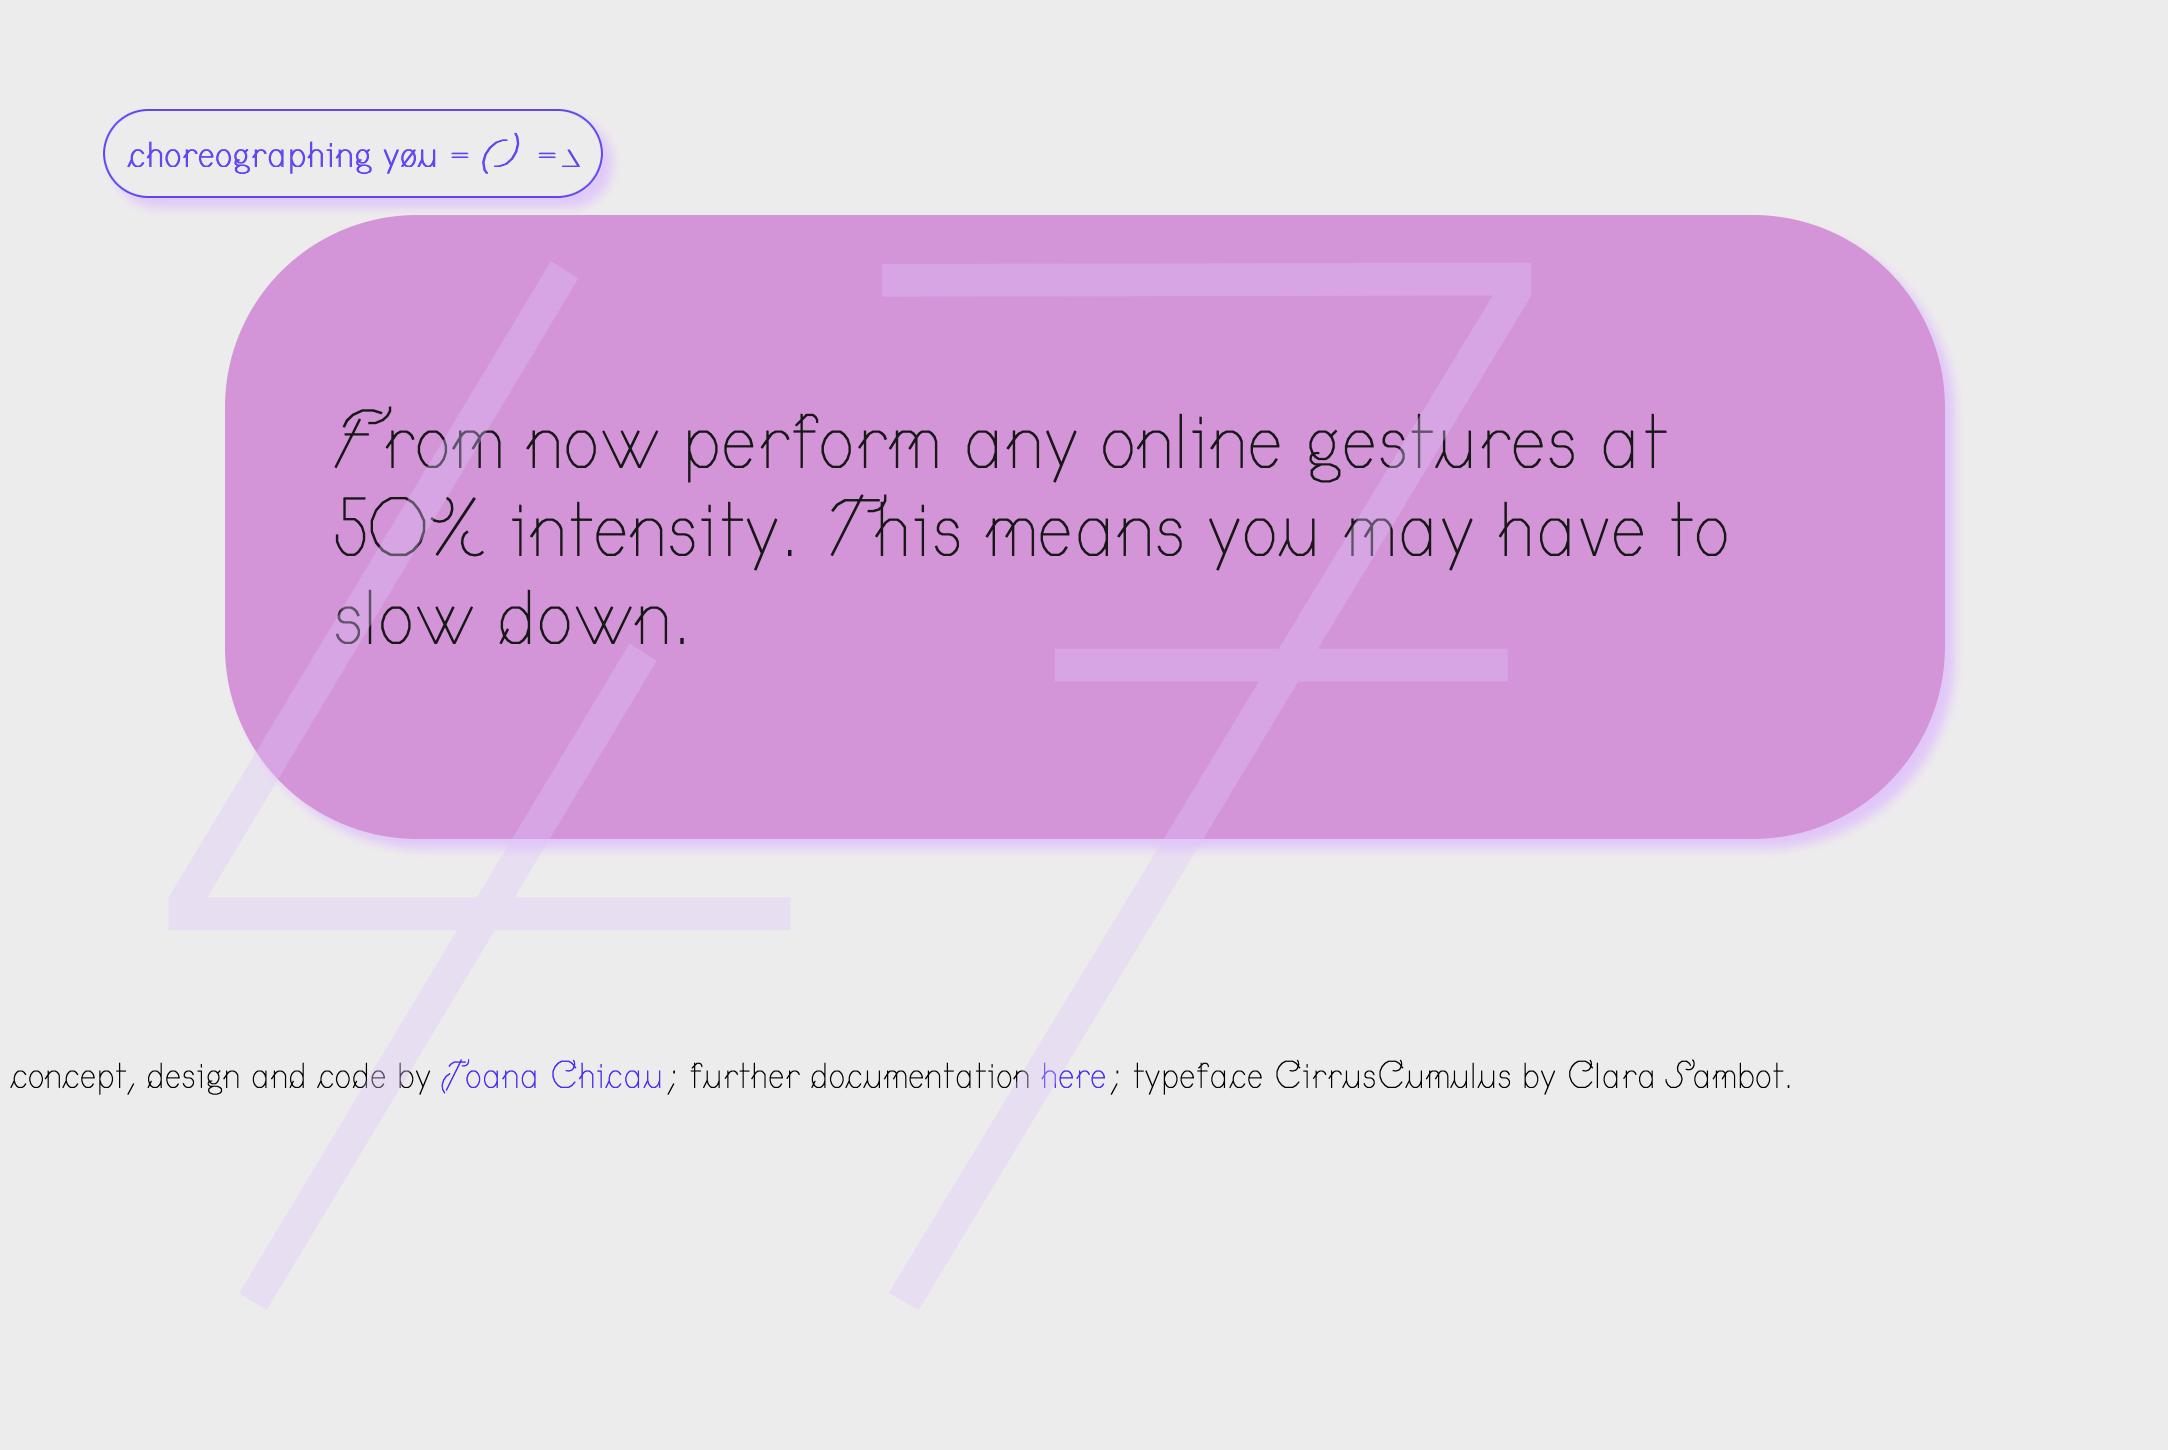 image displaying the artwork, with text in gray over pink background saying: From now on perform online gestures at 50% intensity. This means you may have to slow down.